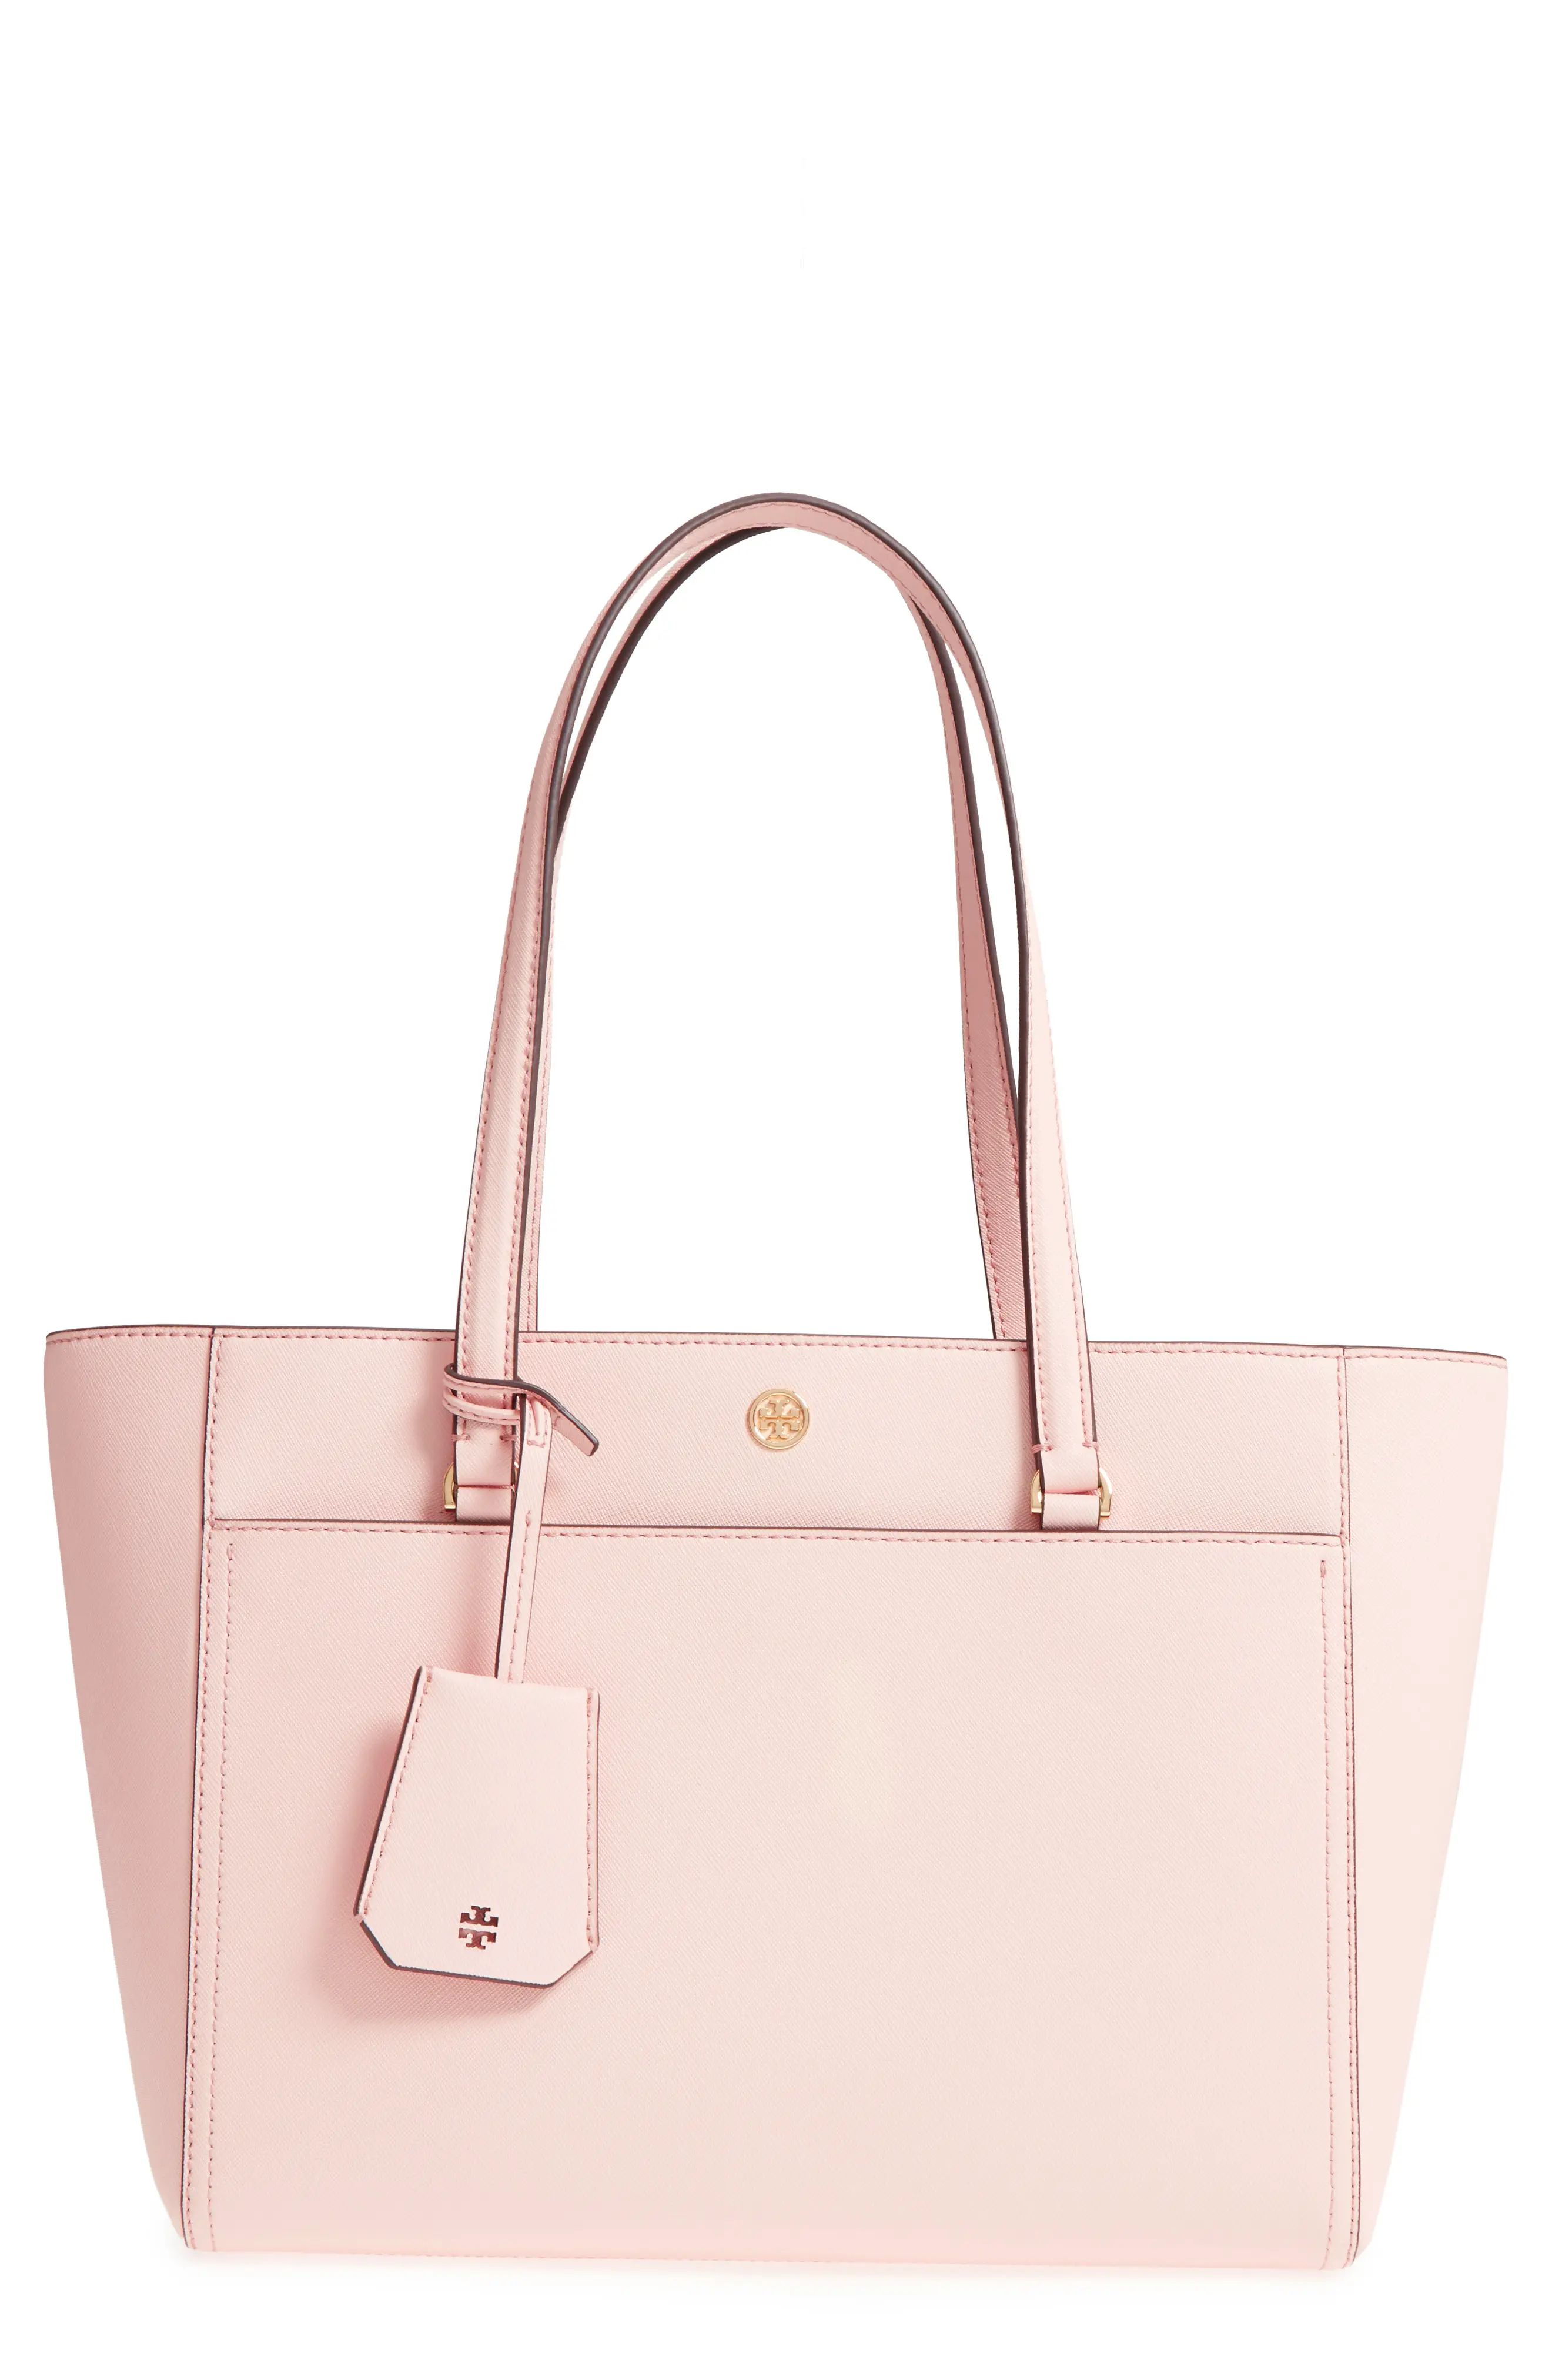 Tory Burch Small Robinson Leather Tote | Nordstrom